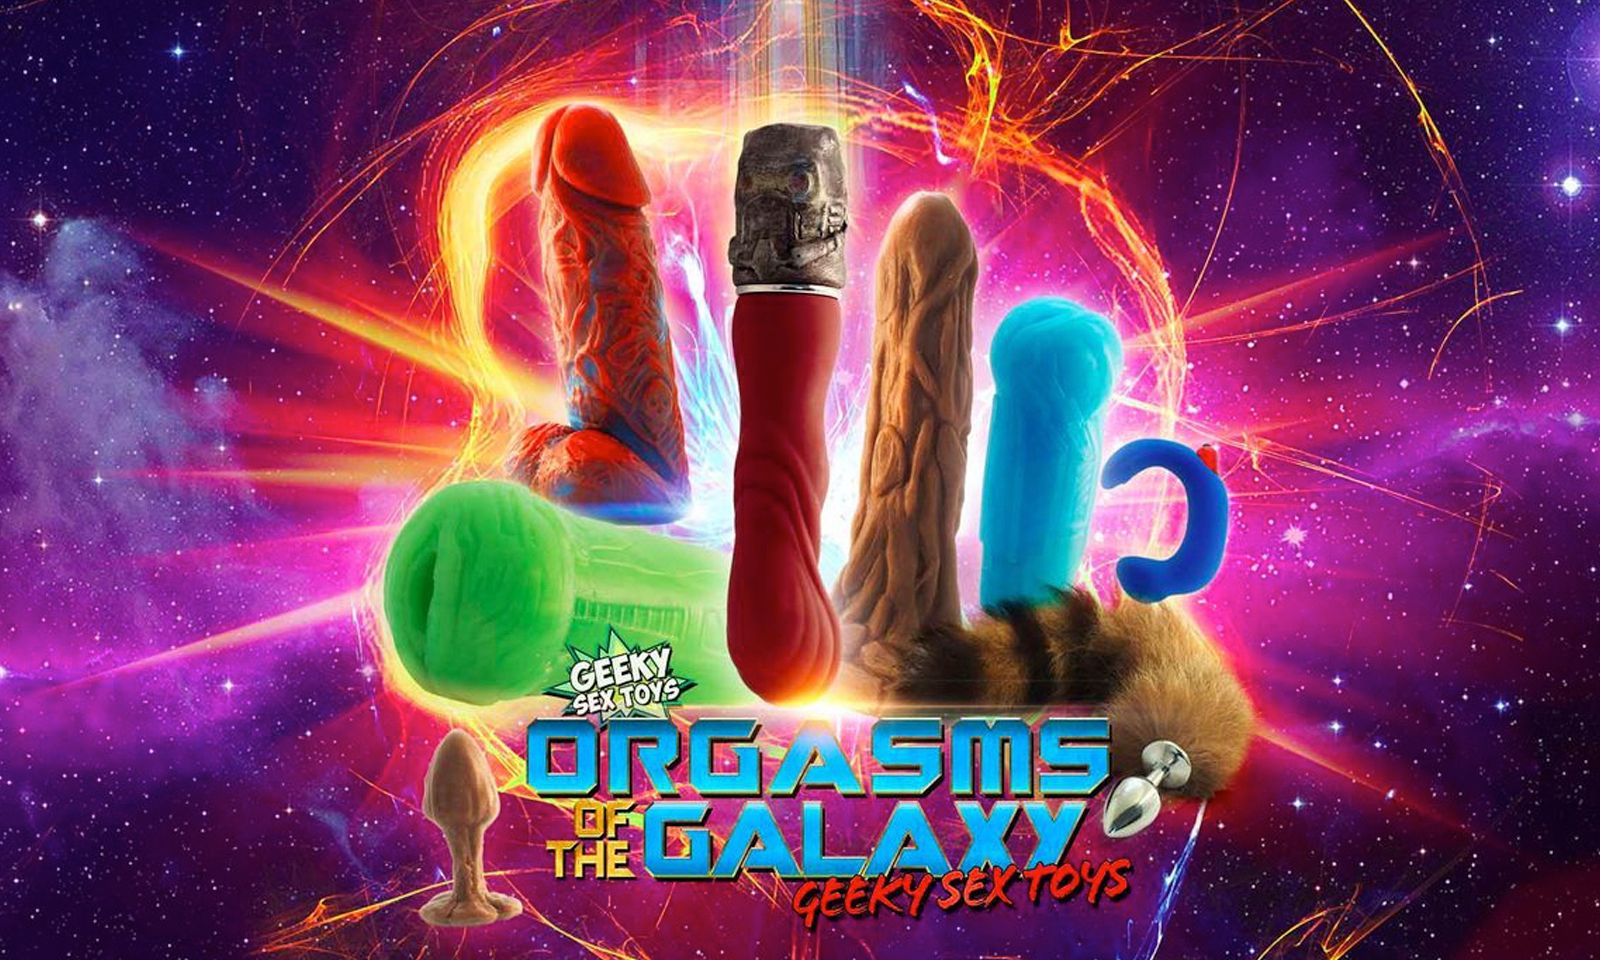 ‘Guardians of the Galaxy’ Gets Geeky Sex Toys Treatment